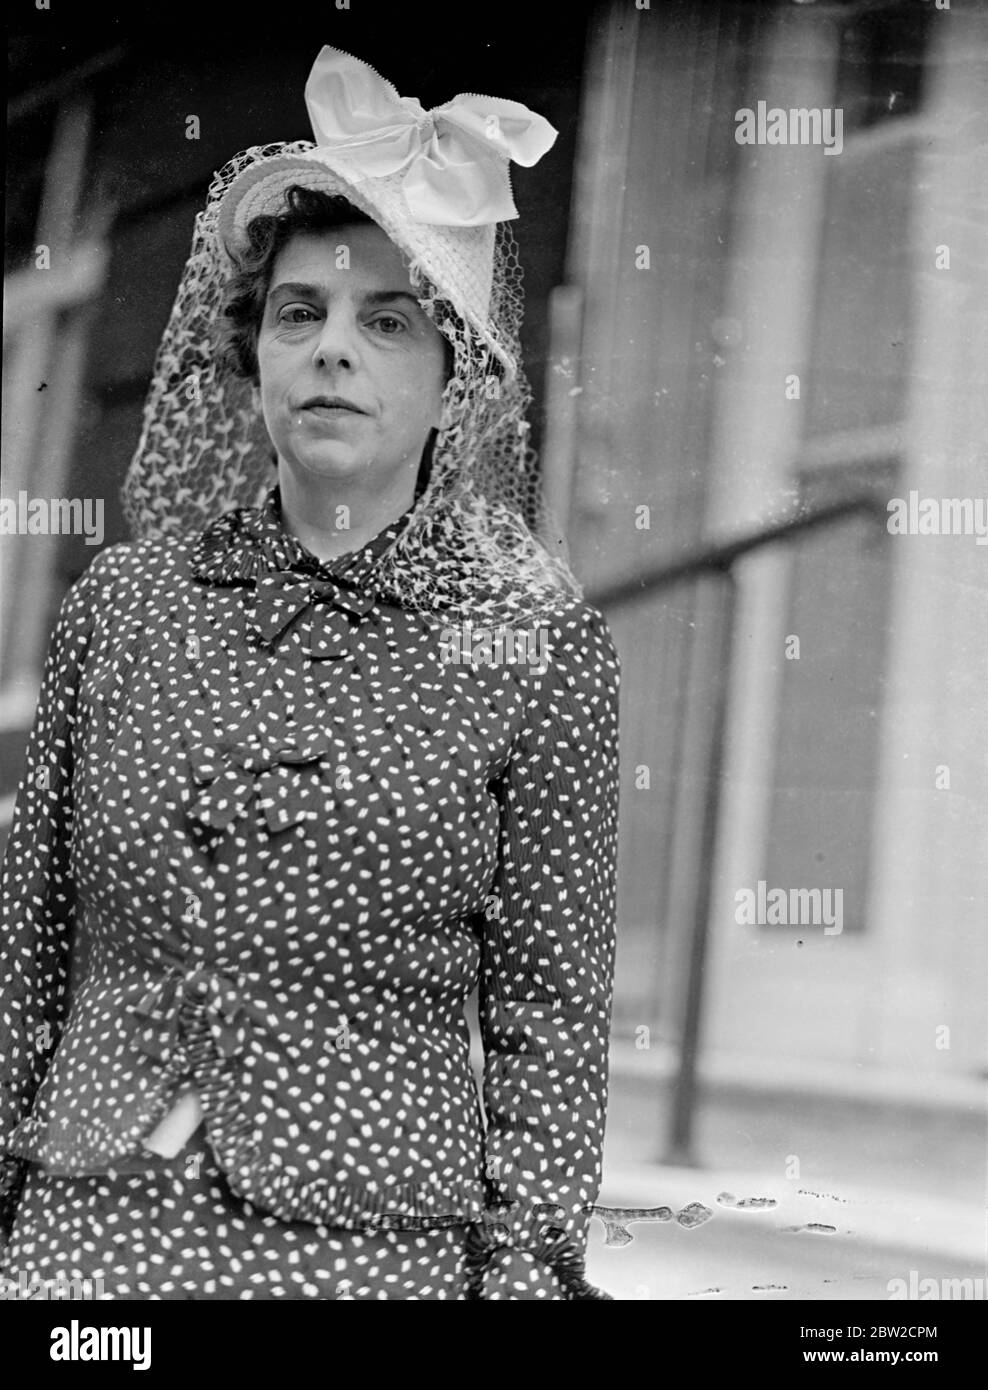 A variation of the old-time poke - Bonnet worn by Lady Derwent during a walk in the West End of London. 19 June 1939 Stock Photo